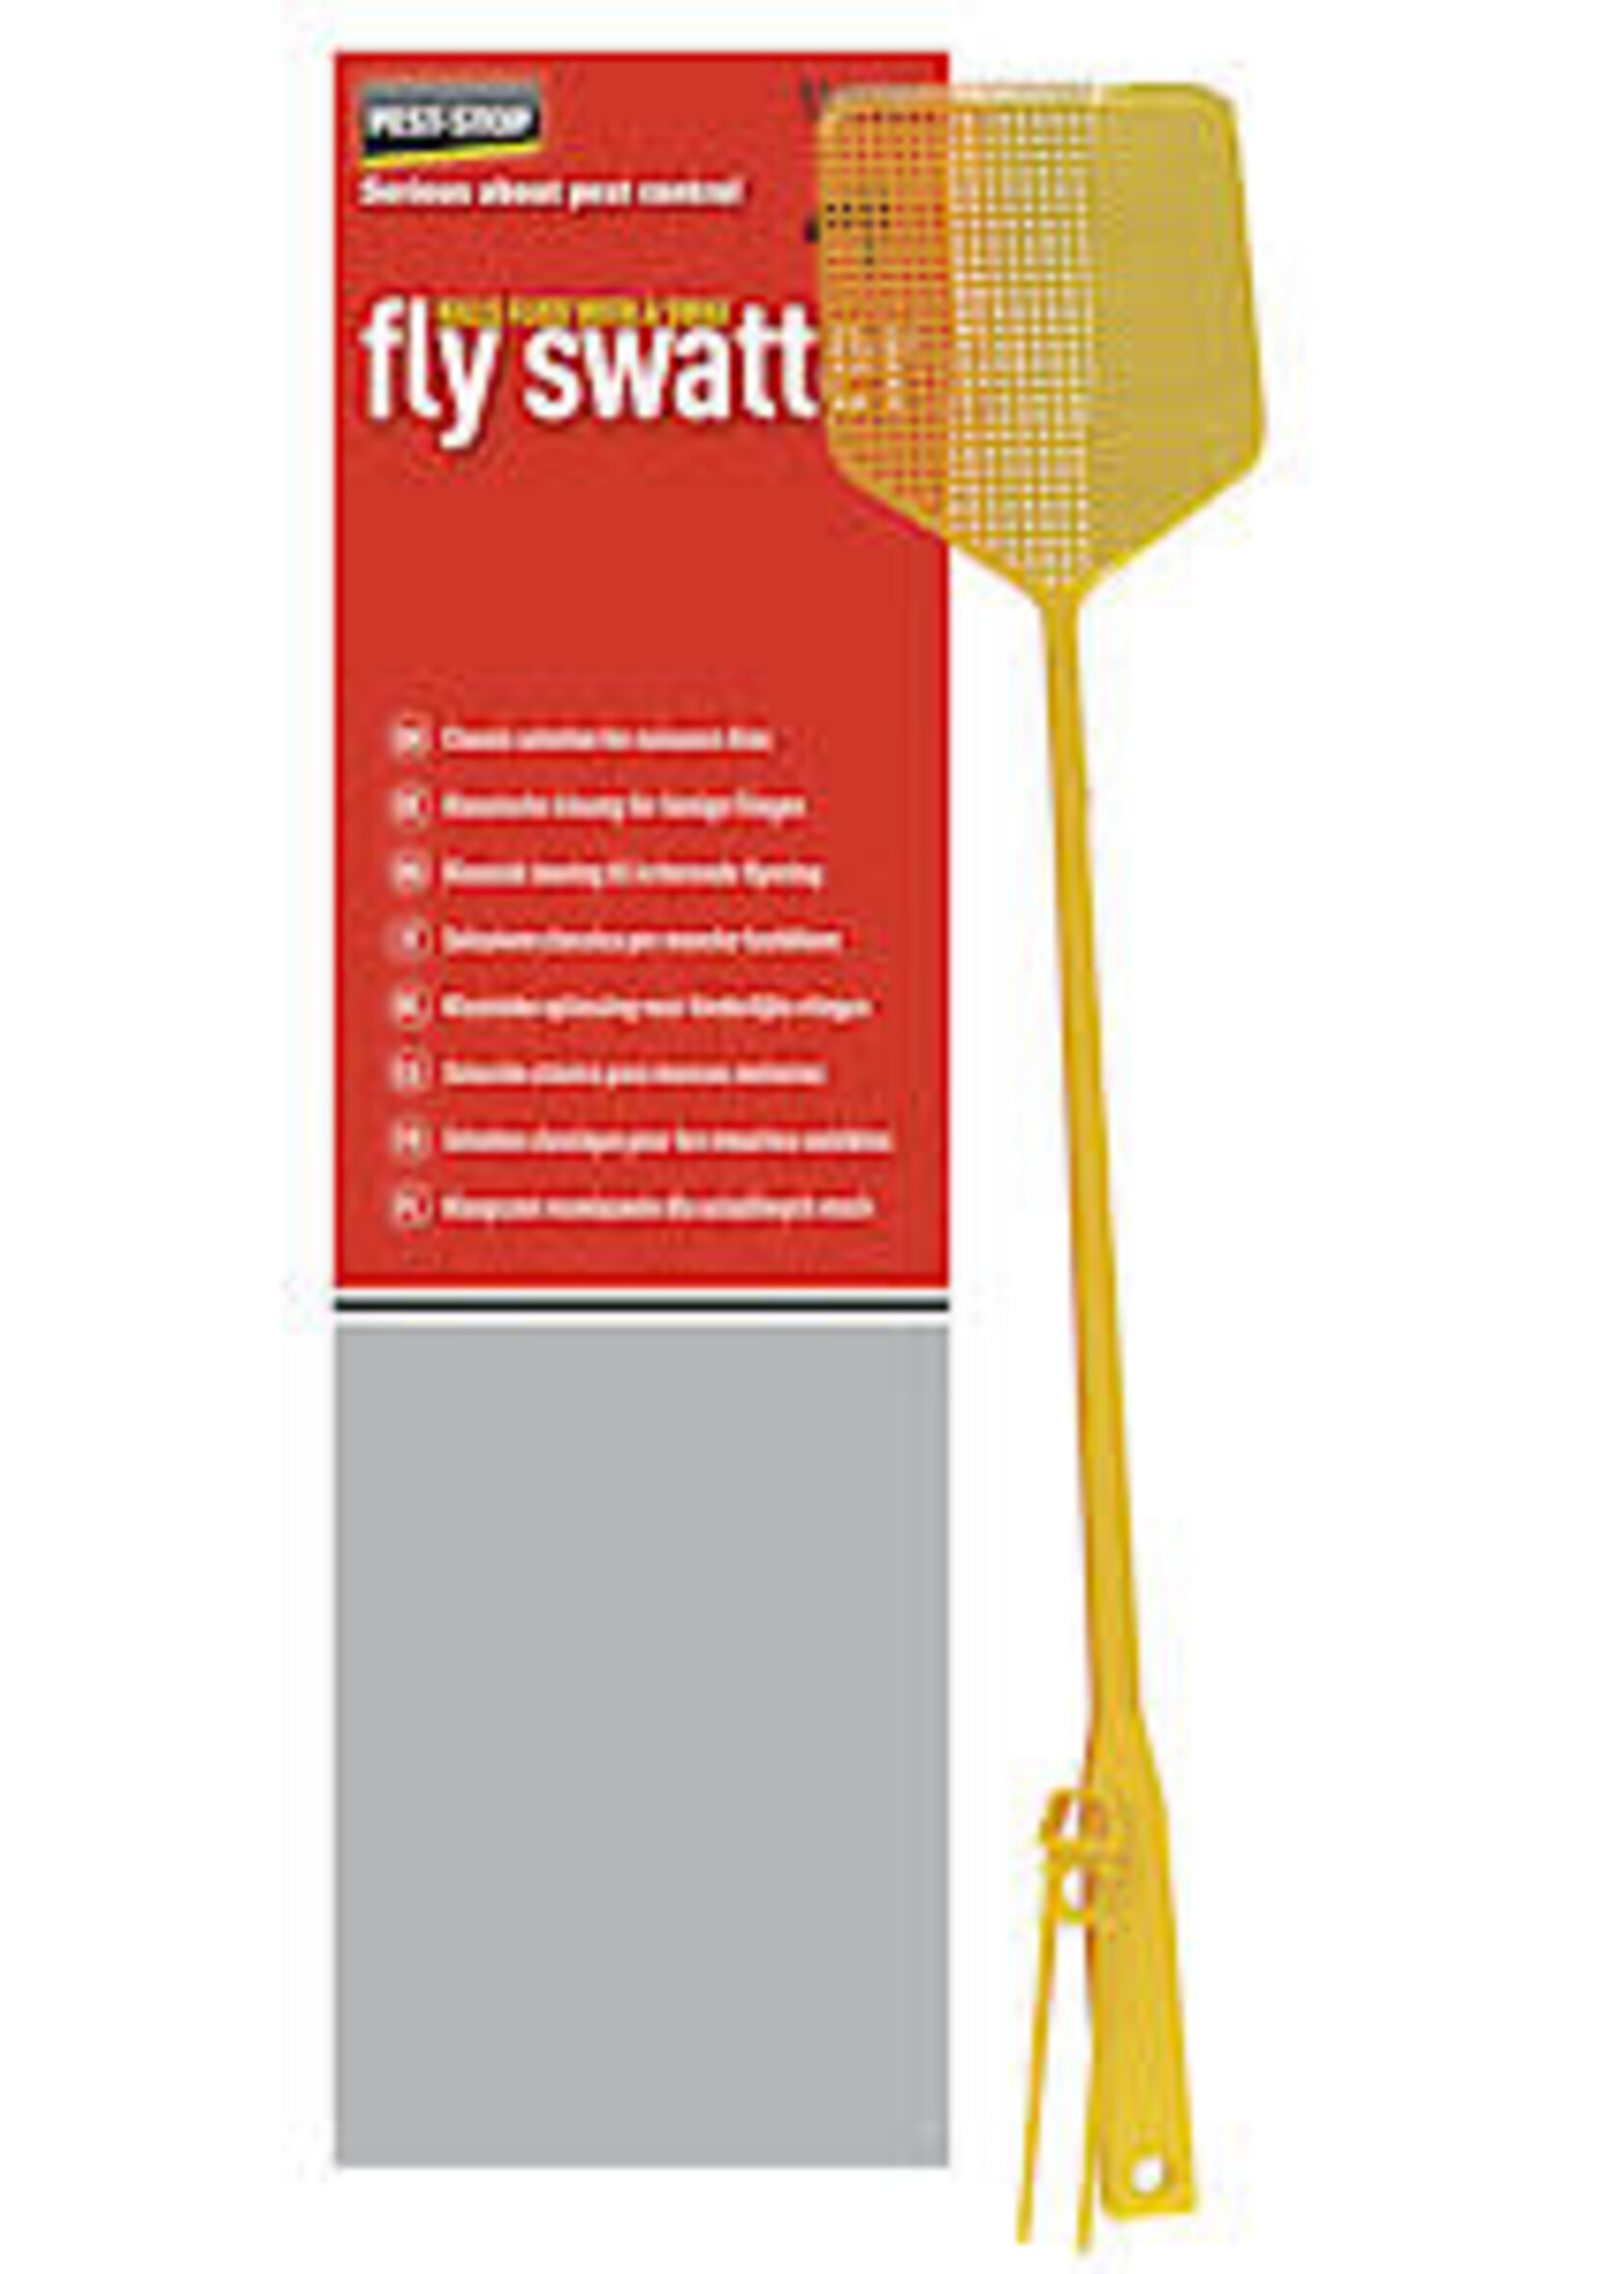 Pest-Stop Fly Swat